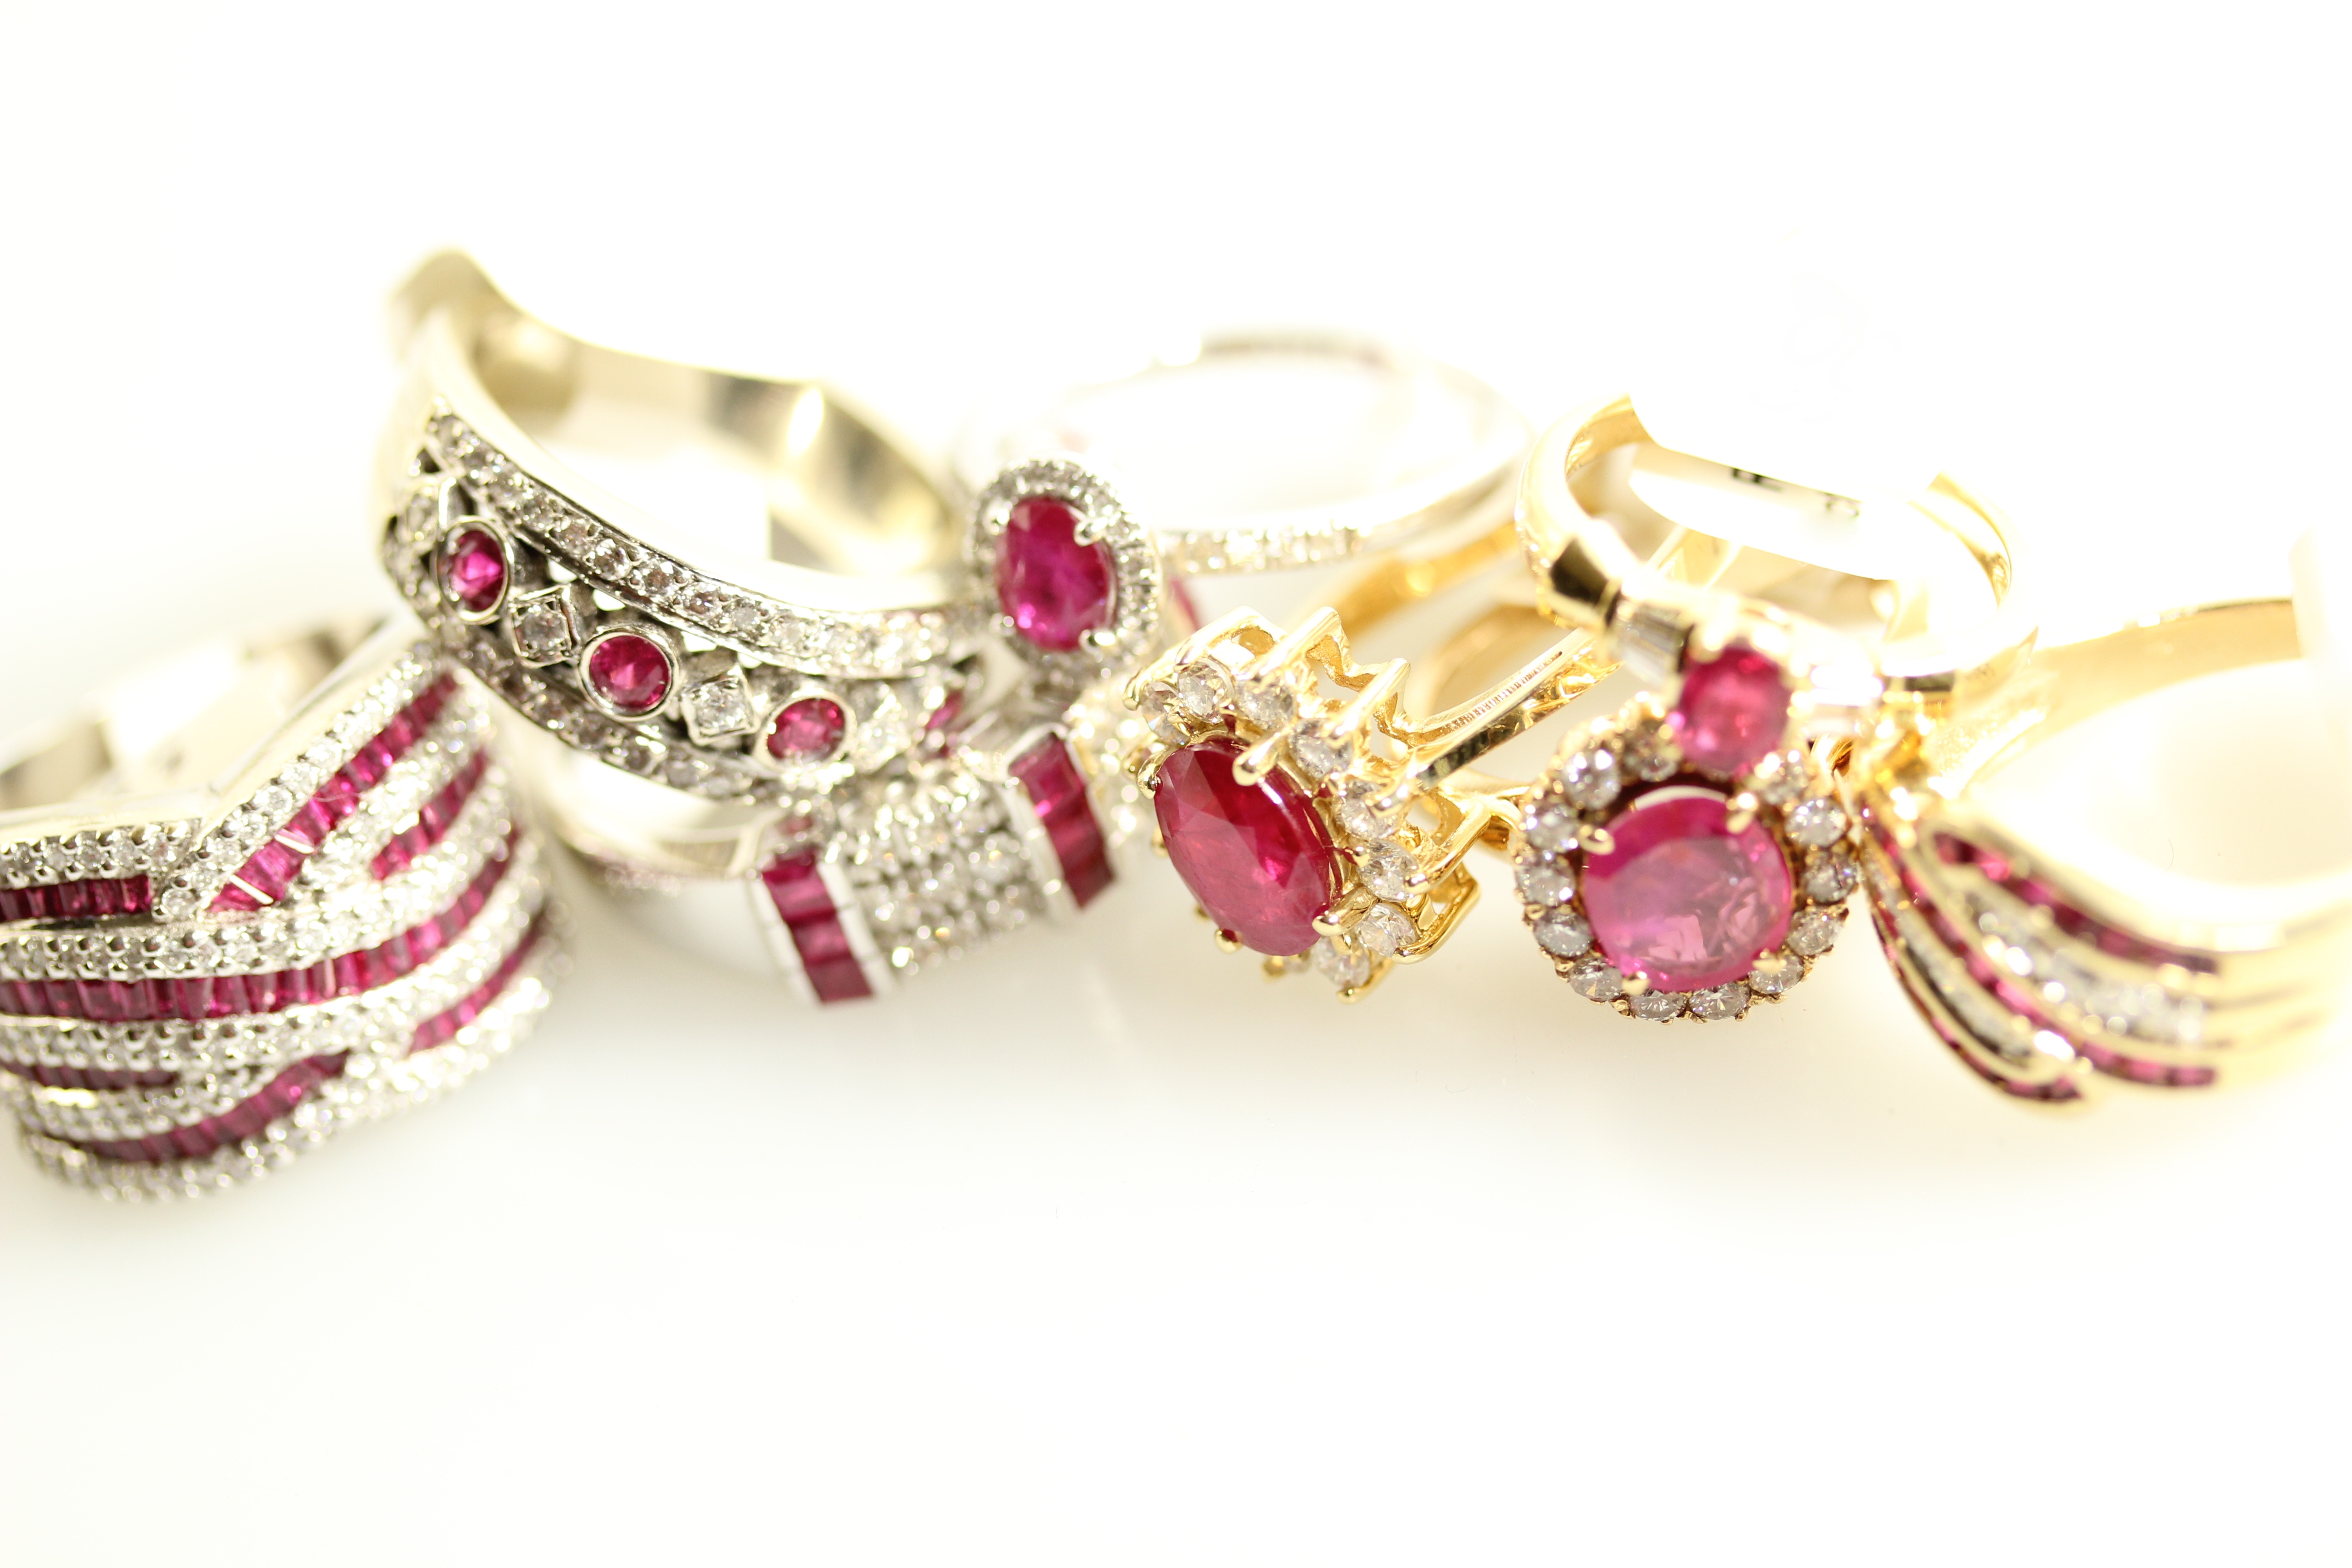 Ruby rings and Jewelry